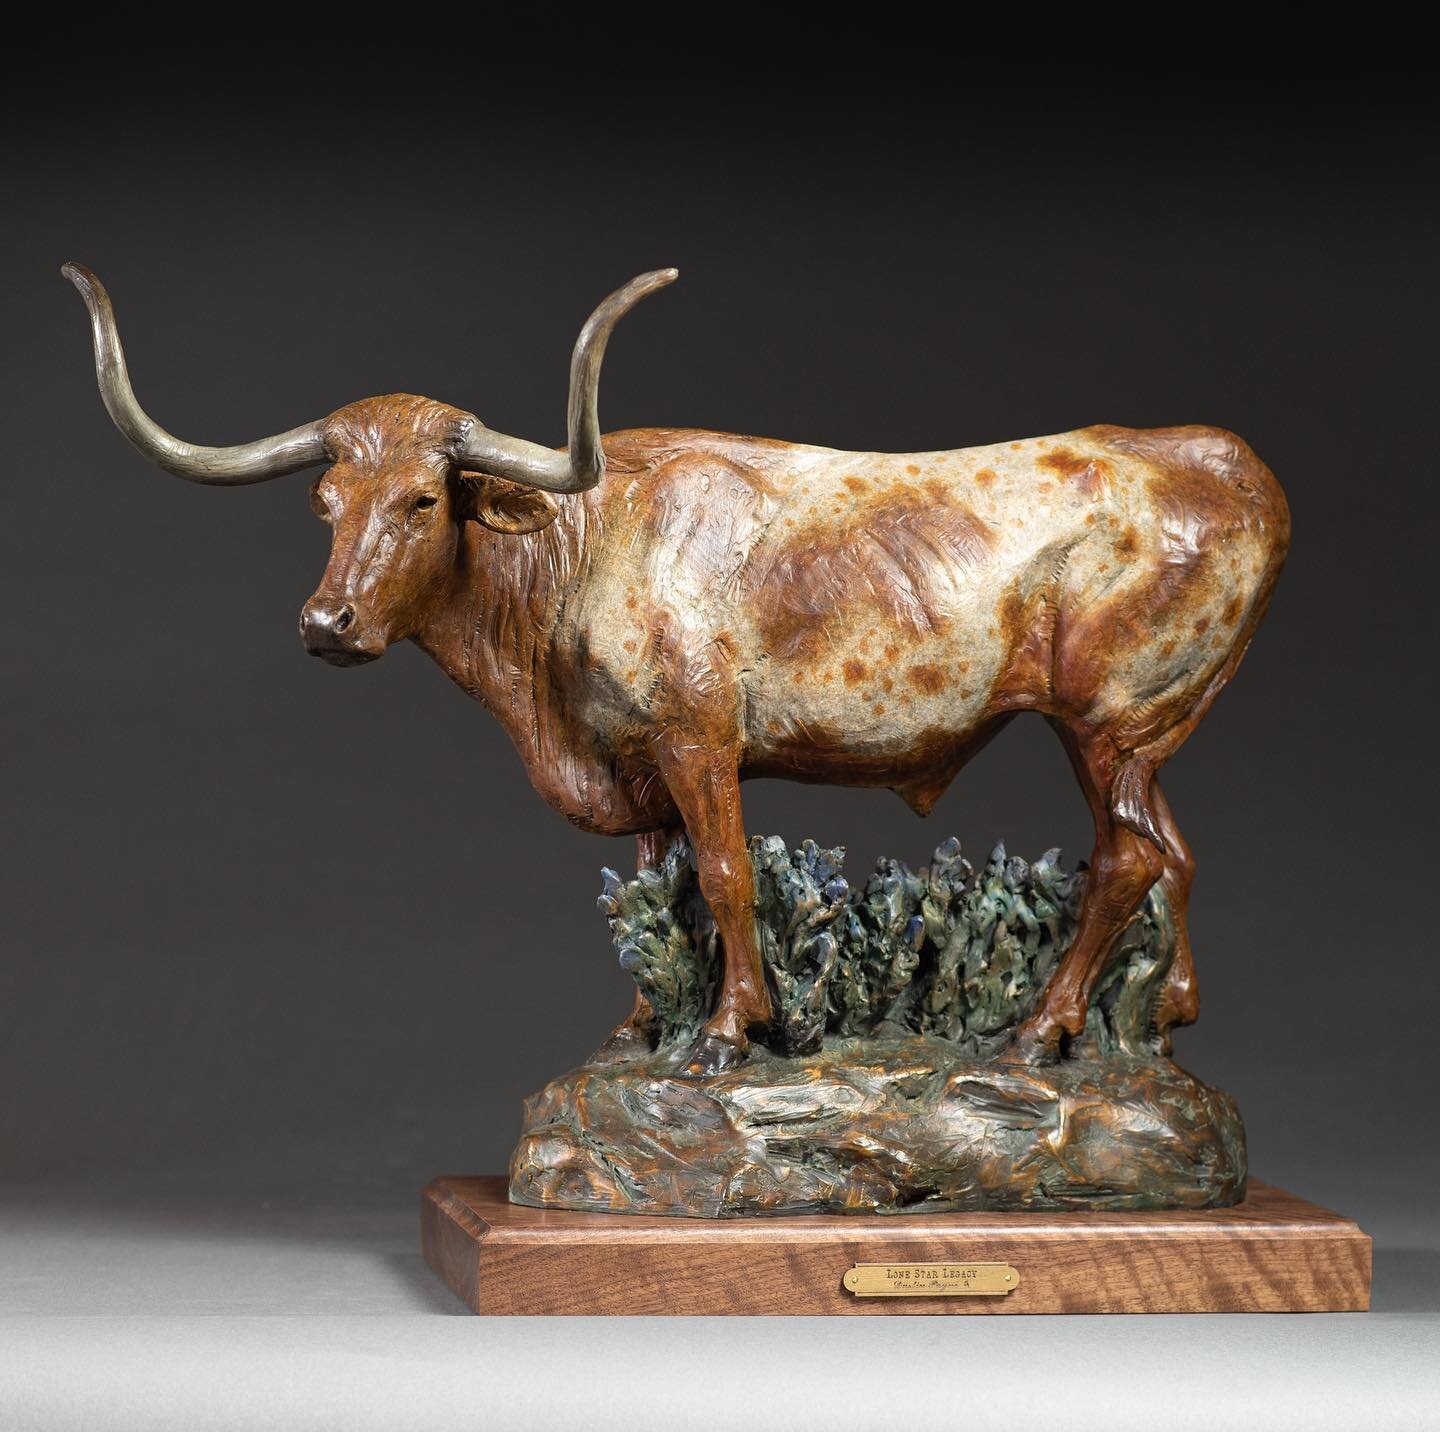 Lone Star Legacy | Limited Edition of 20 in bronze ⁠
⁠
The longhorn steer and bluebonnets hold immense cultural and historical significance in Texas, representing iconic symbols of the state&rsquo;s heritage and natural beauty. The longhorn, descenda